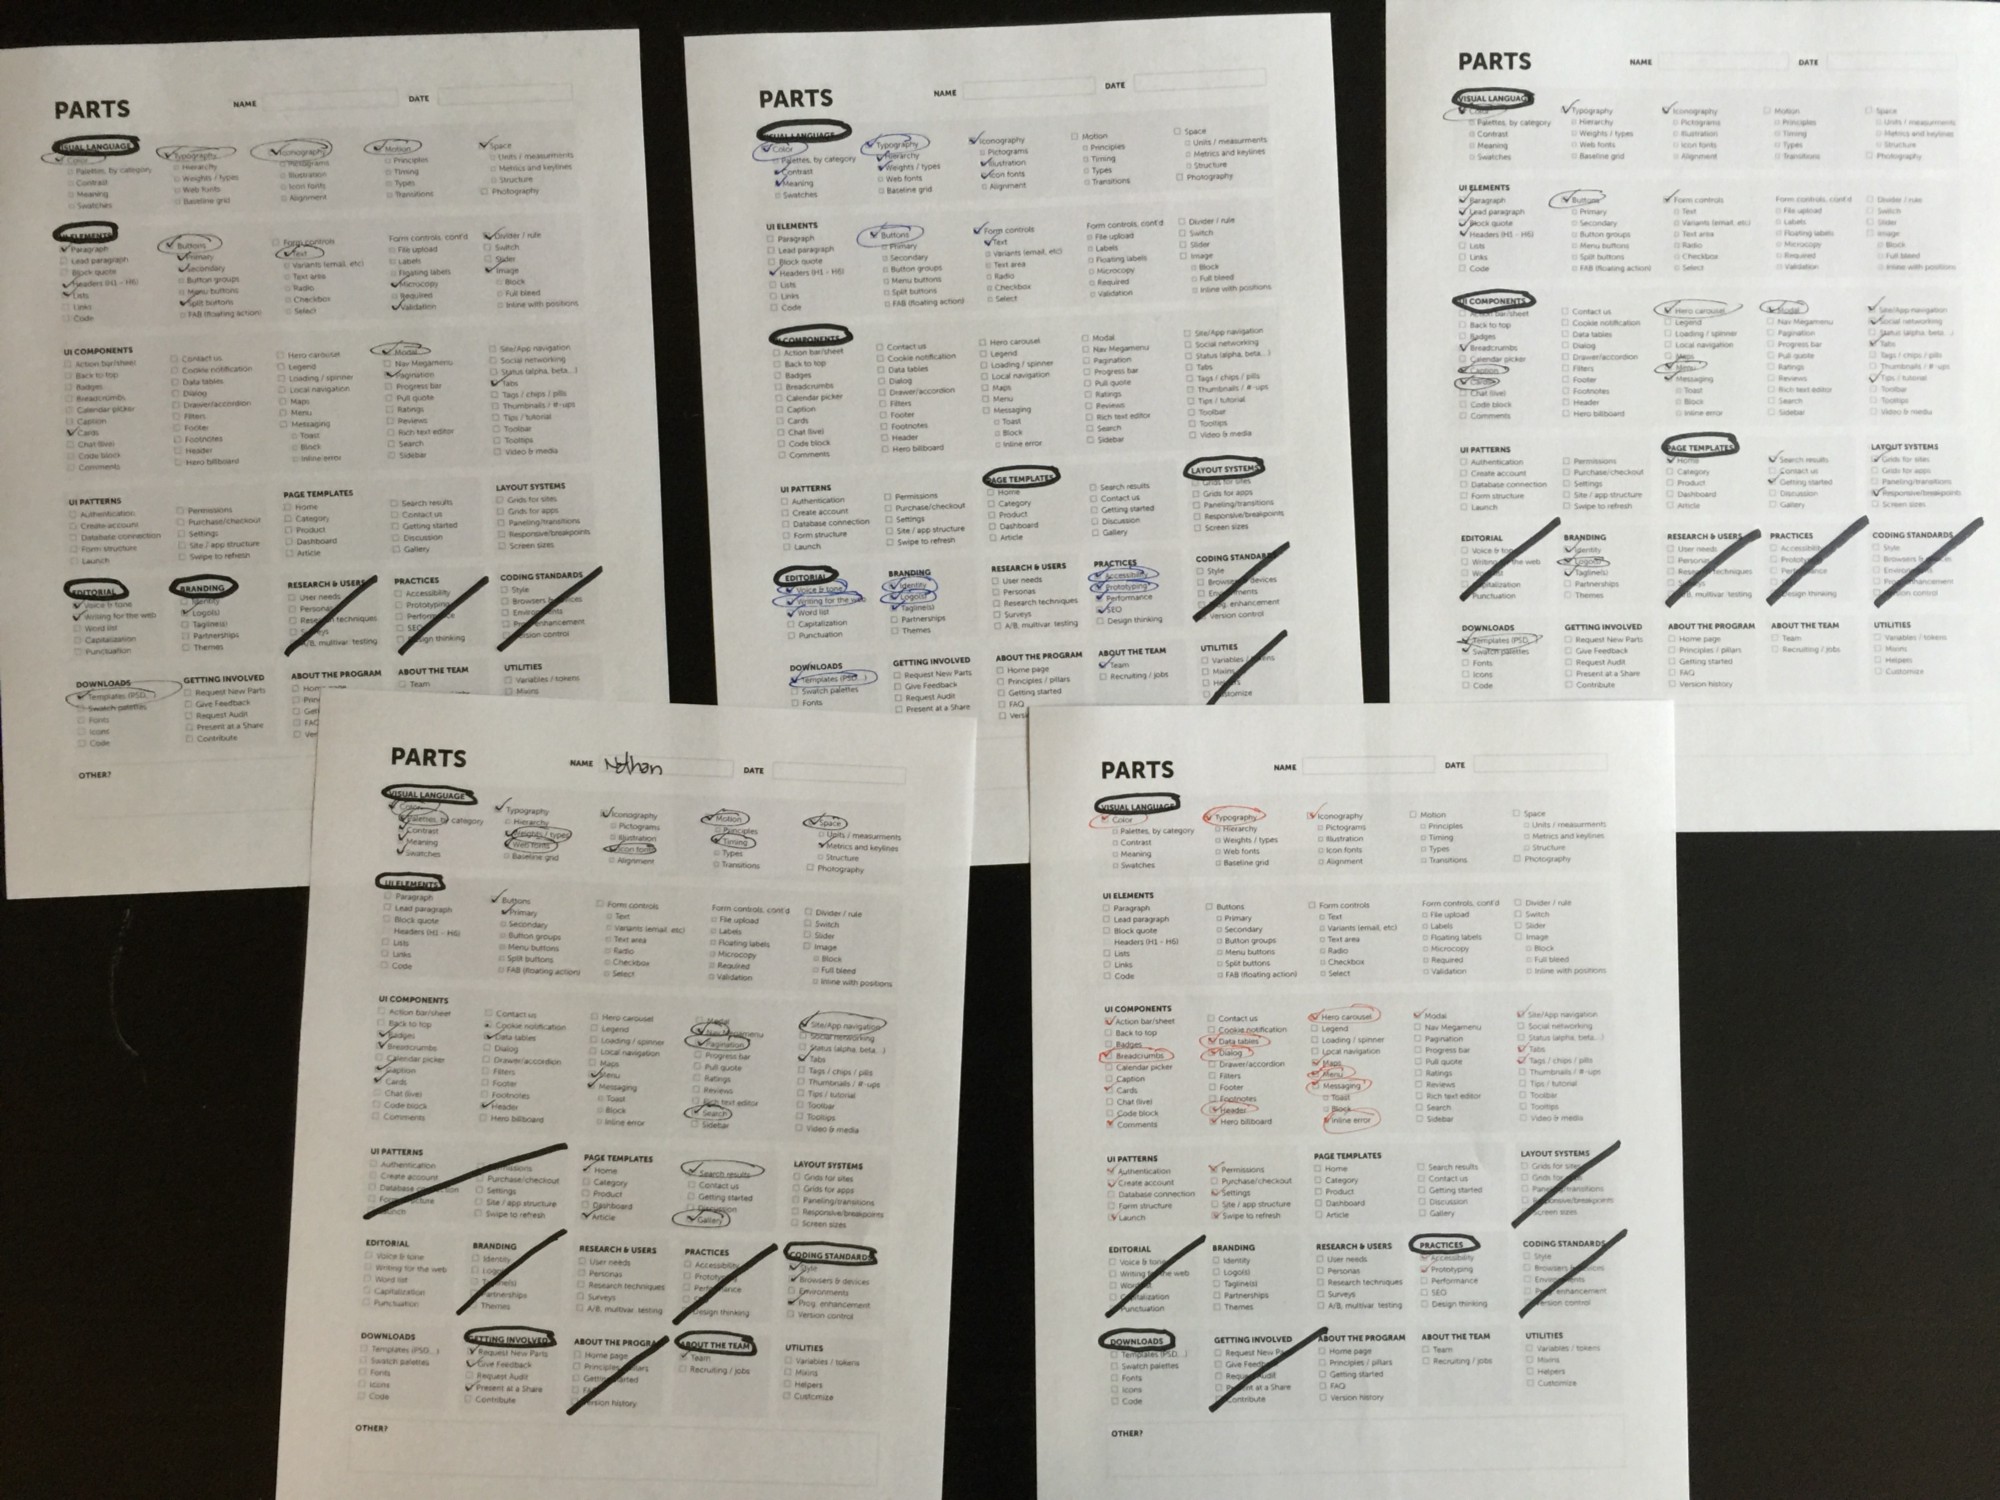 Photograph of completed worksheets